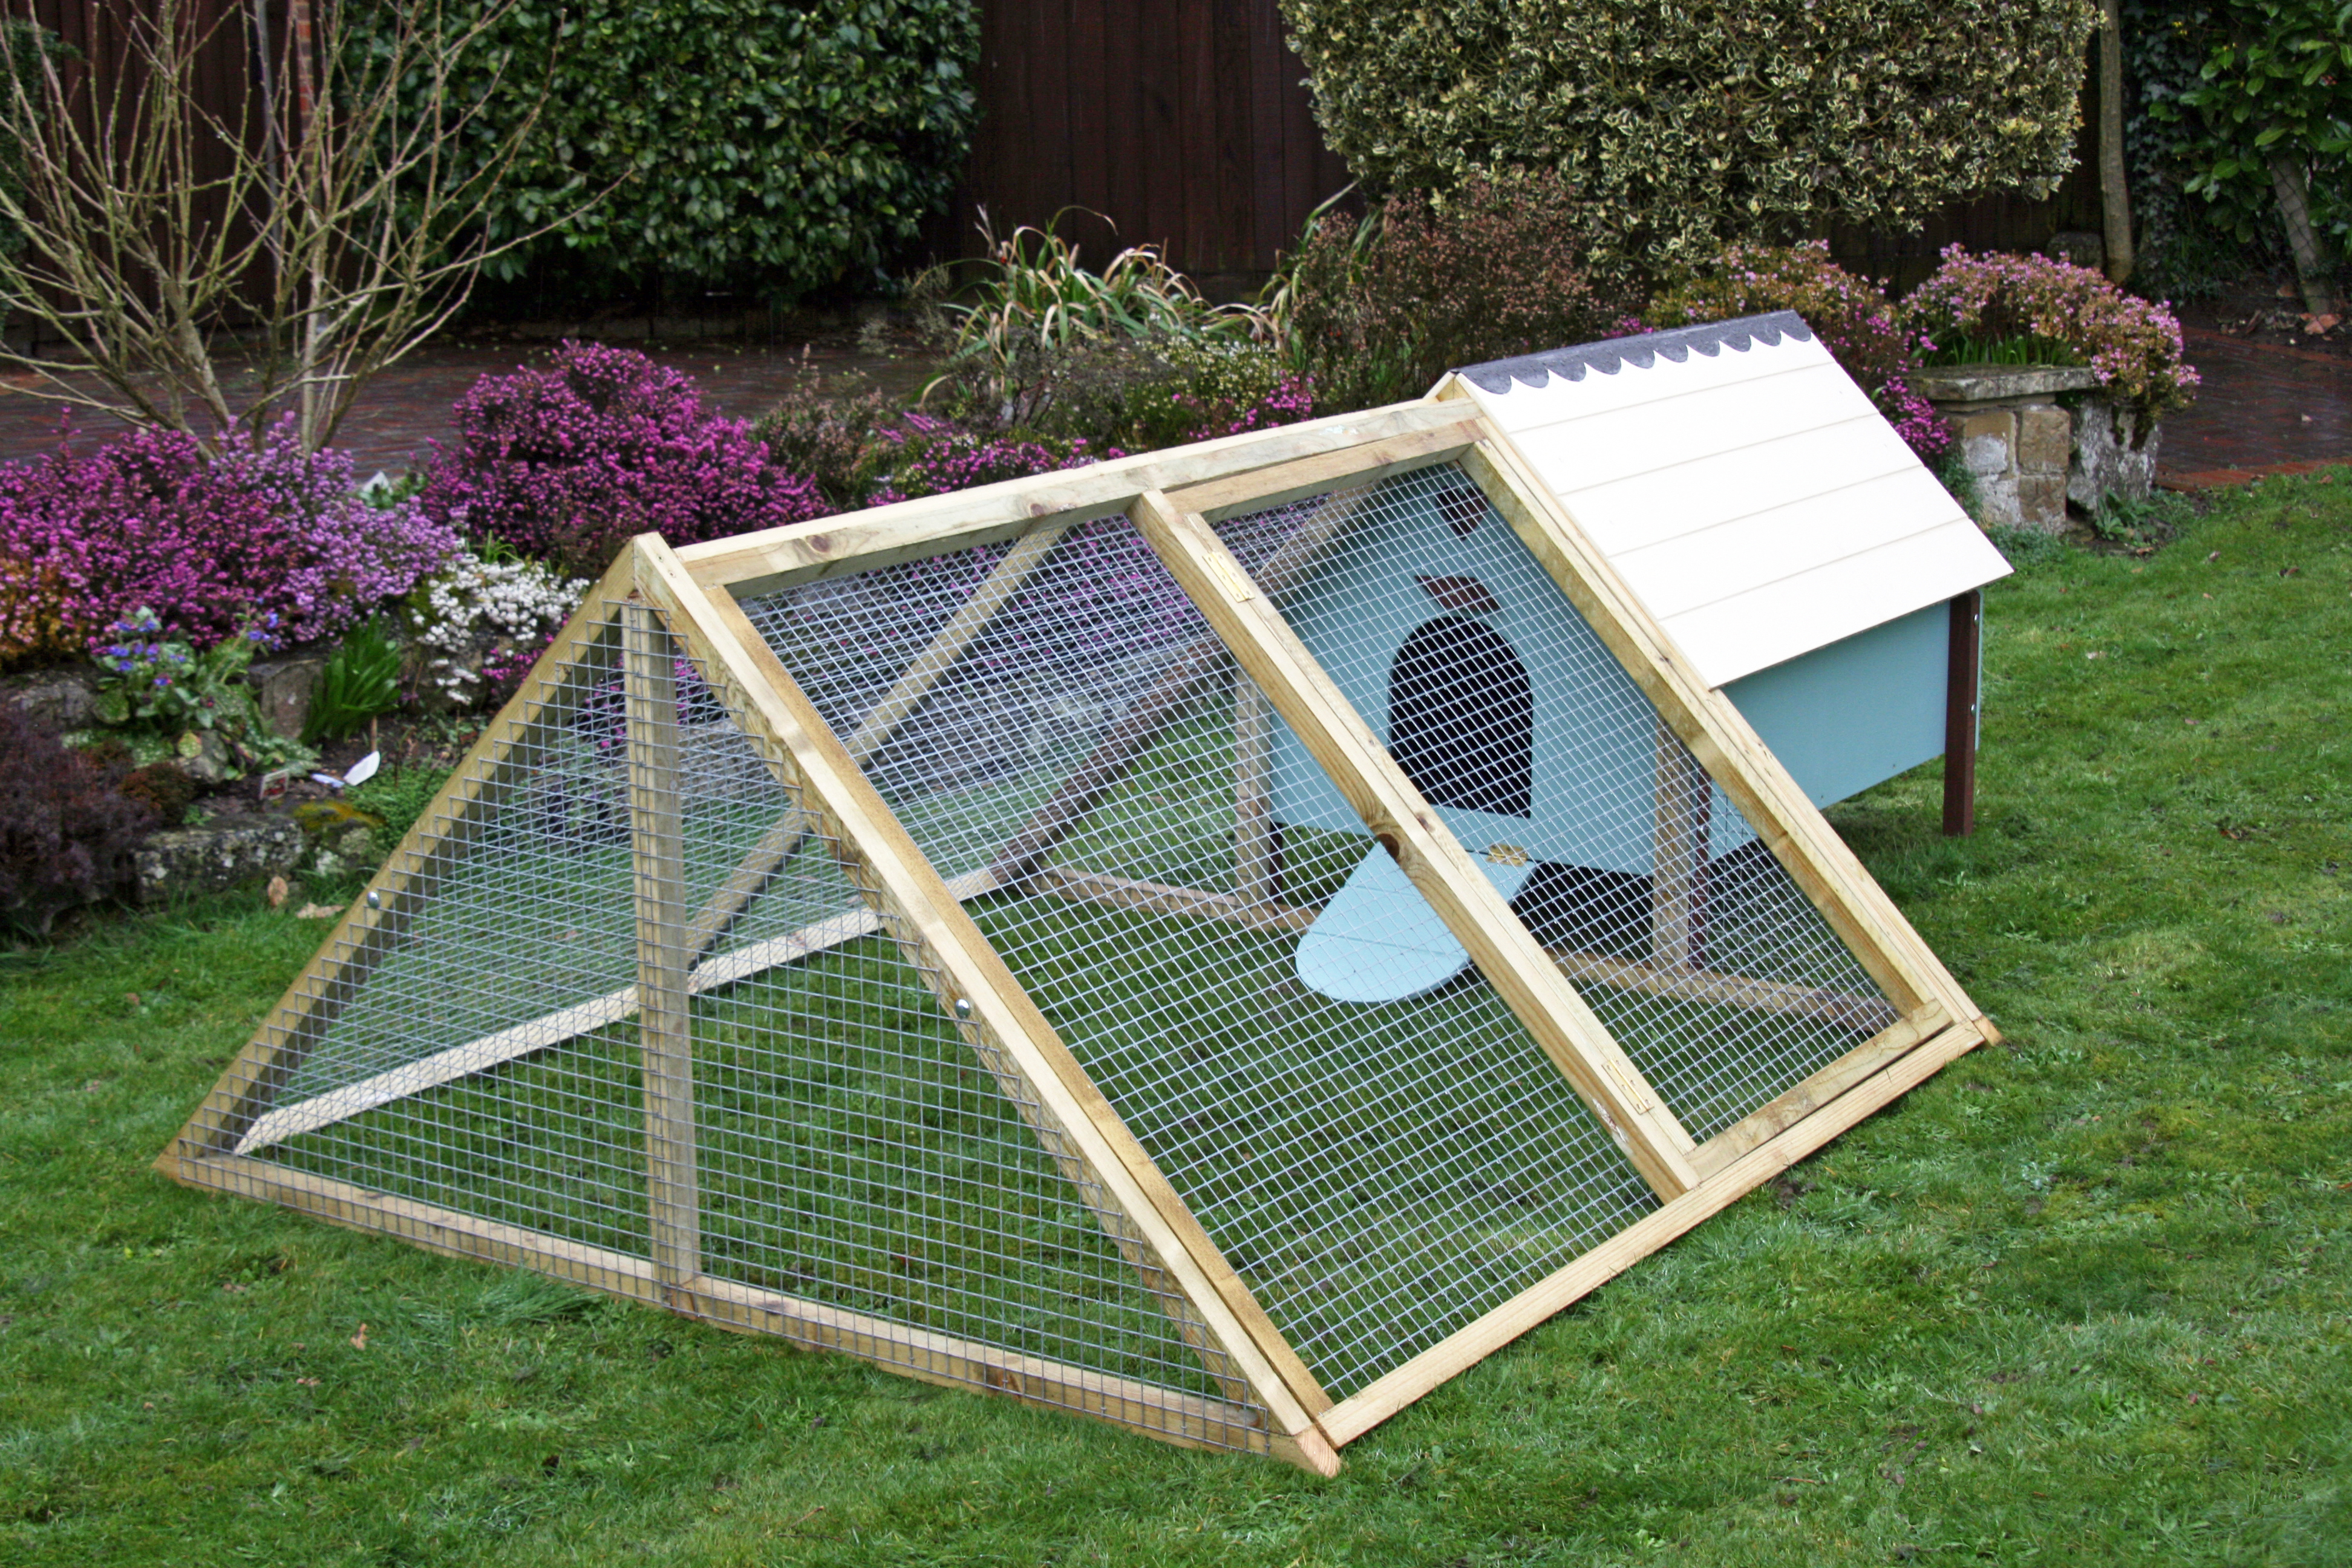 DIY Chicken Coops Plans That Are Easy To Build